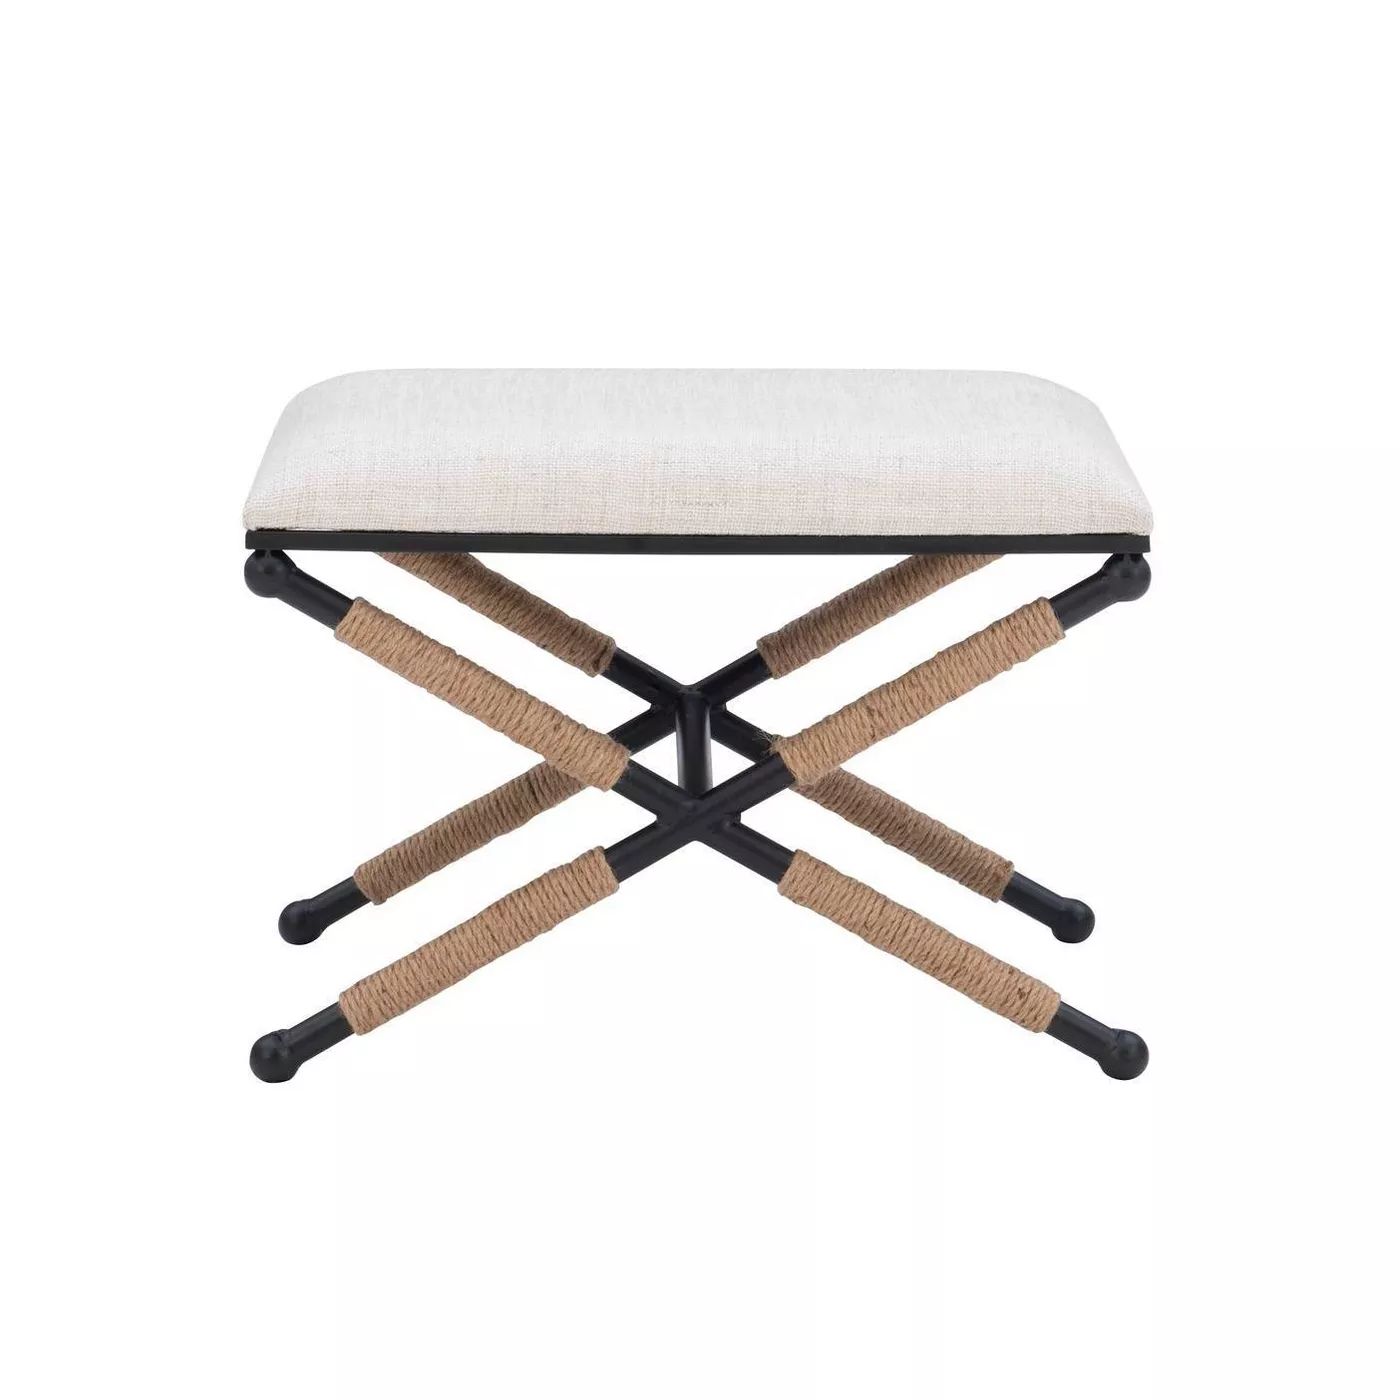 Ashburn Campaign Accent Stool Buff Beige - Linon | Target